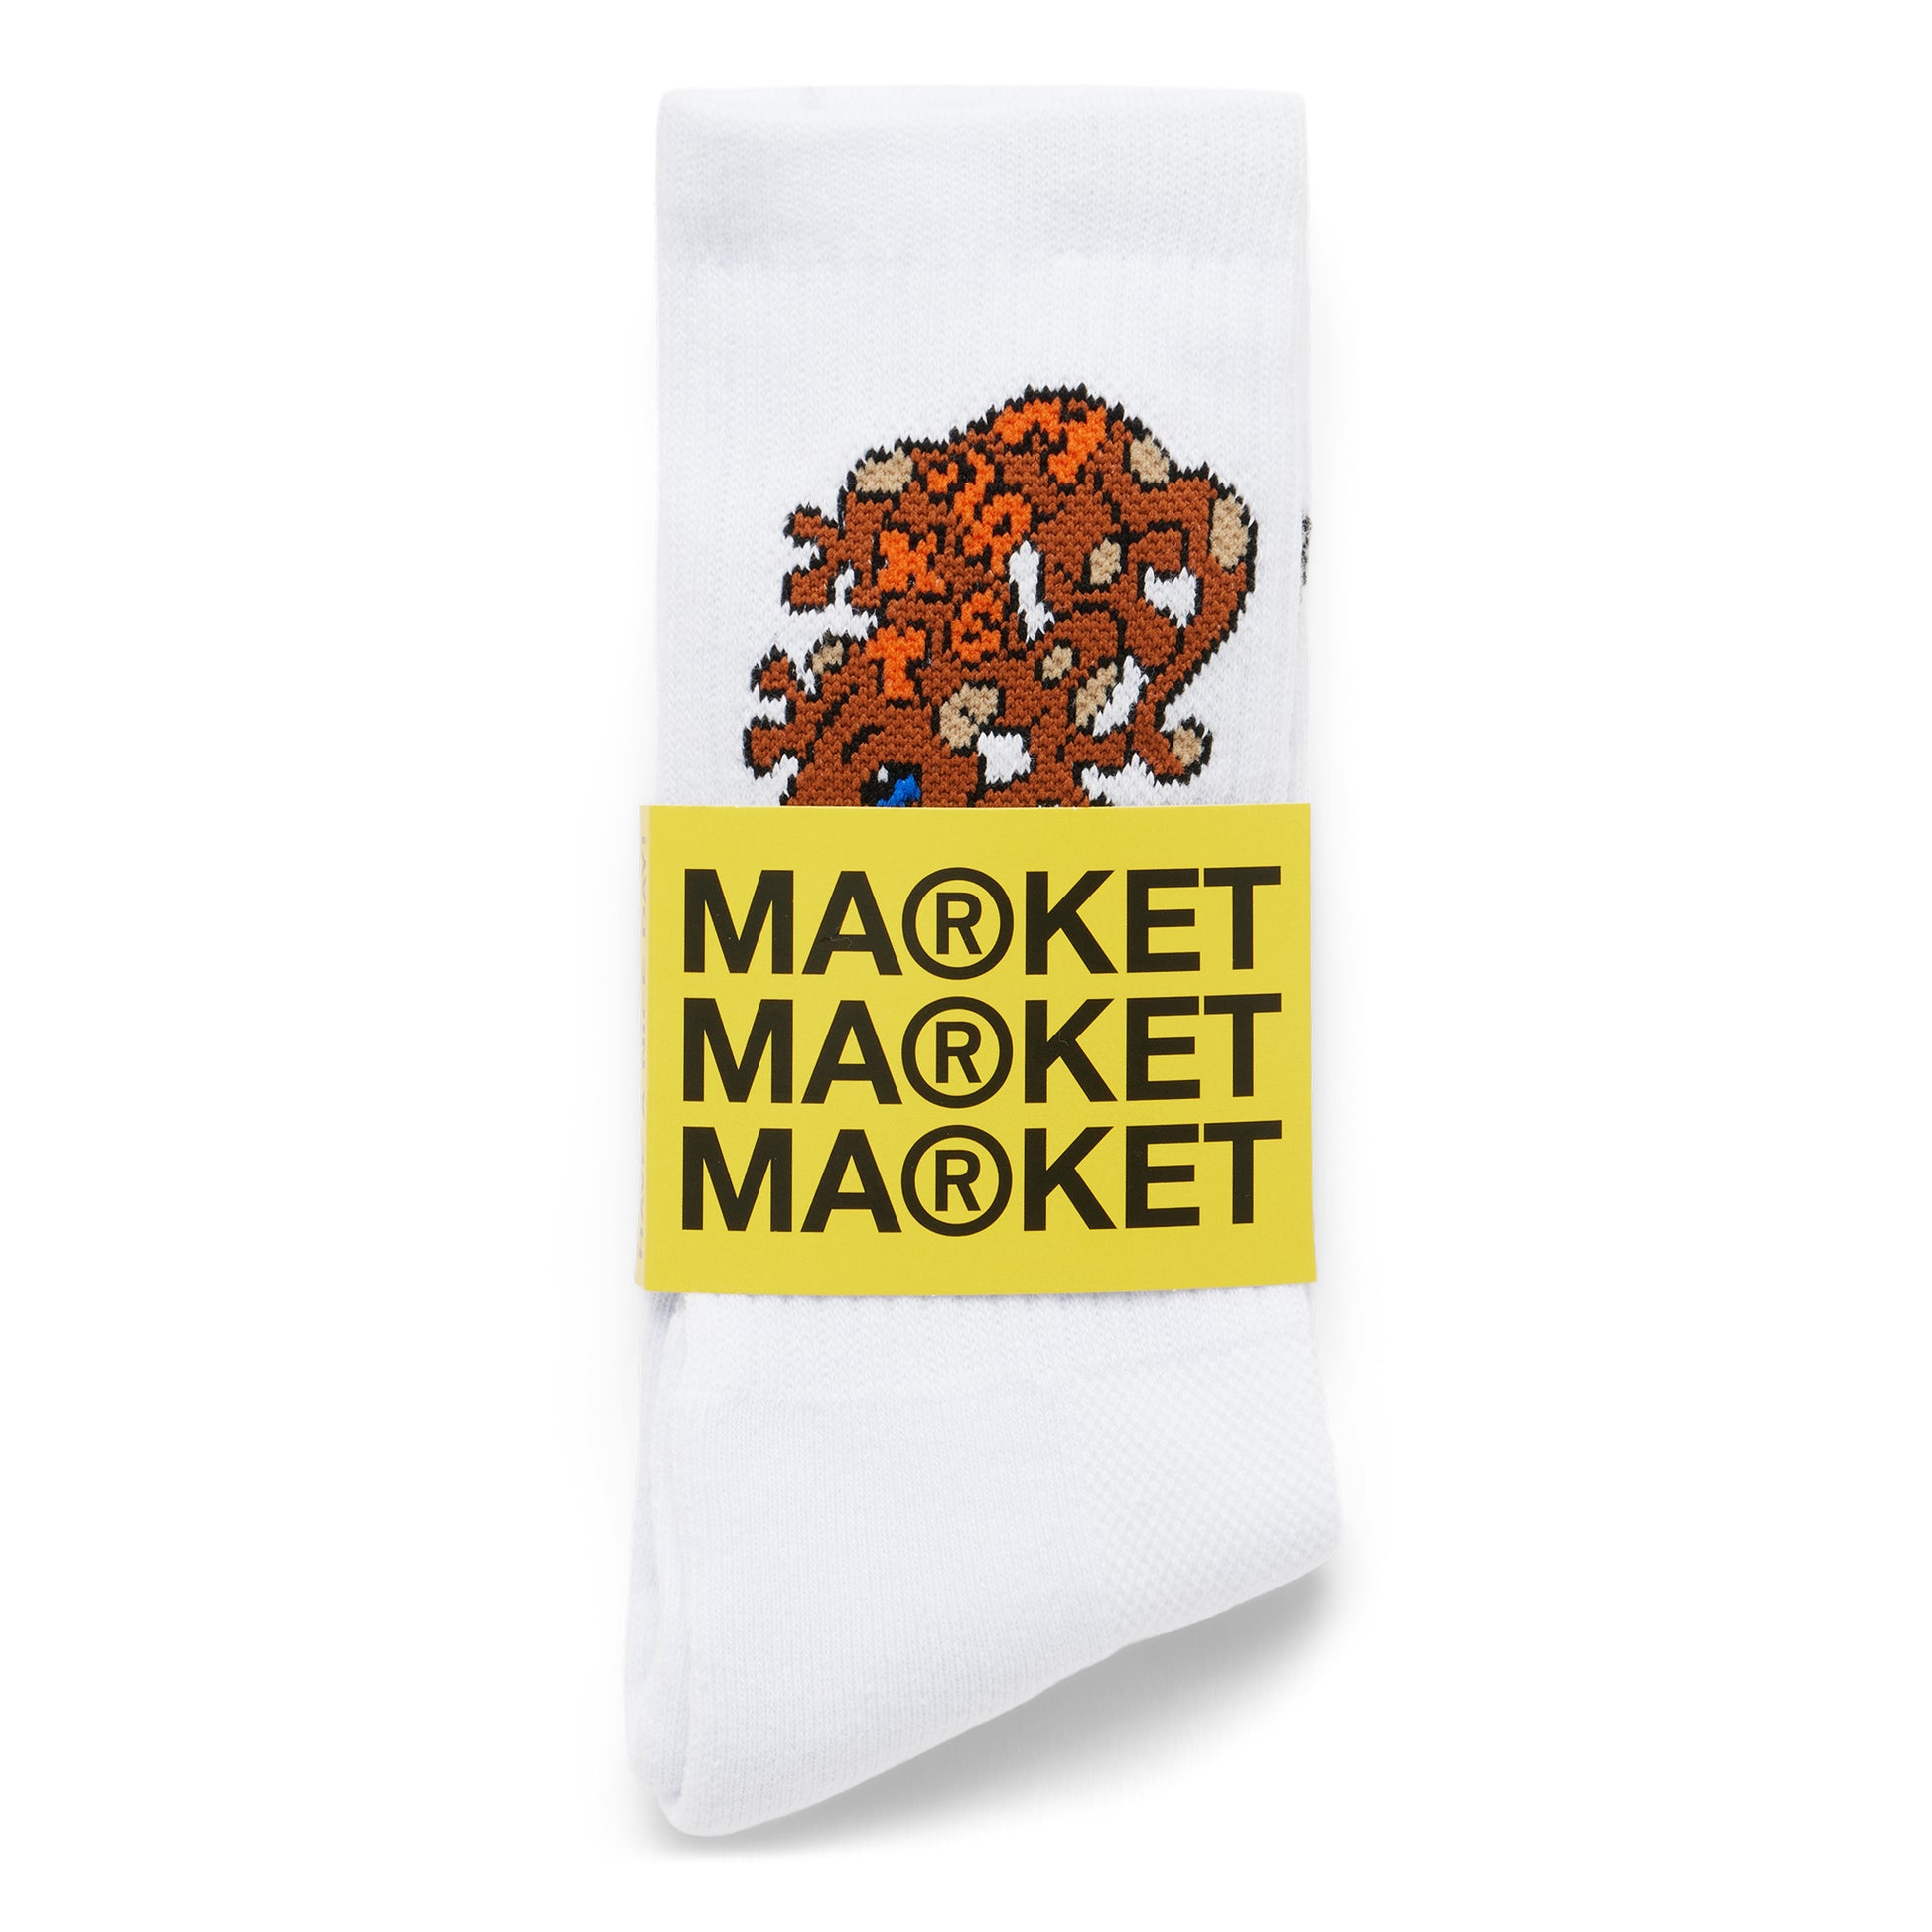 MARKET clothing brand LIZARD SOCKS. Find more graphic tees, socks, hats and small goods at MarketStudios.com. Formally Chinatown Market. 